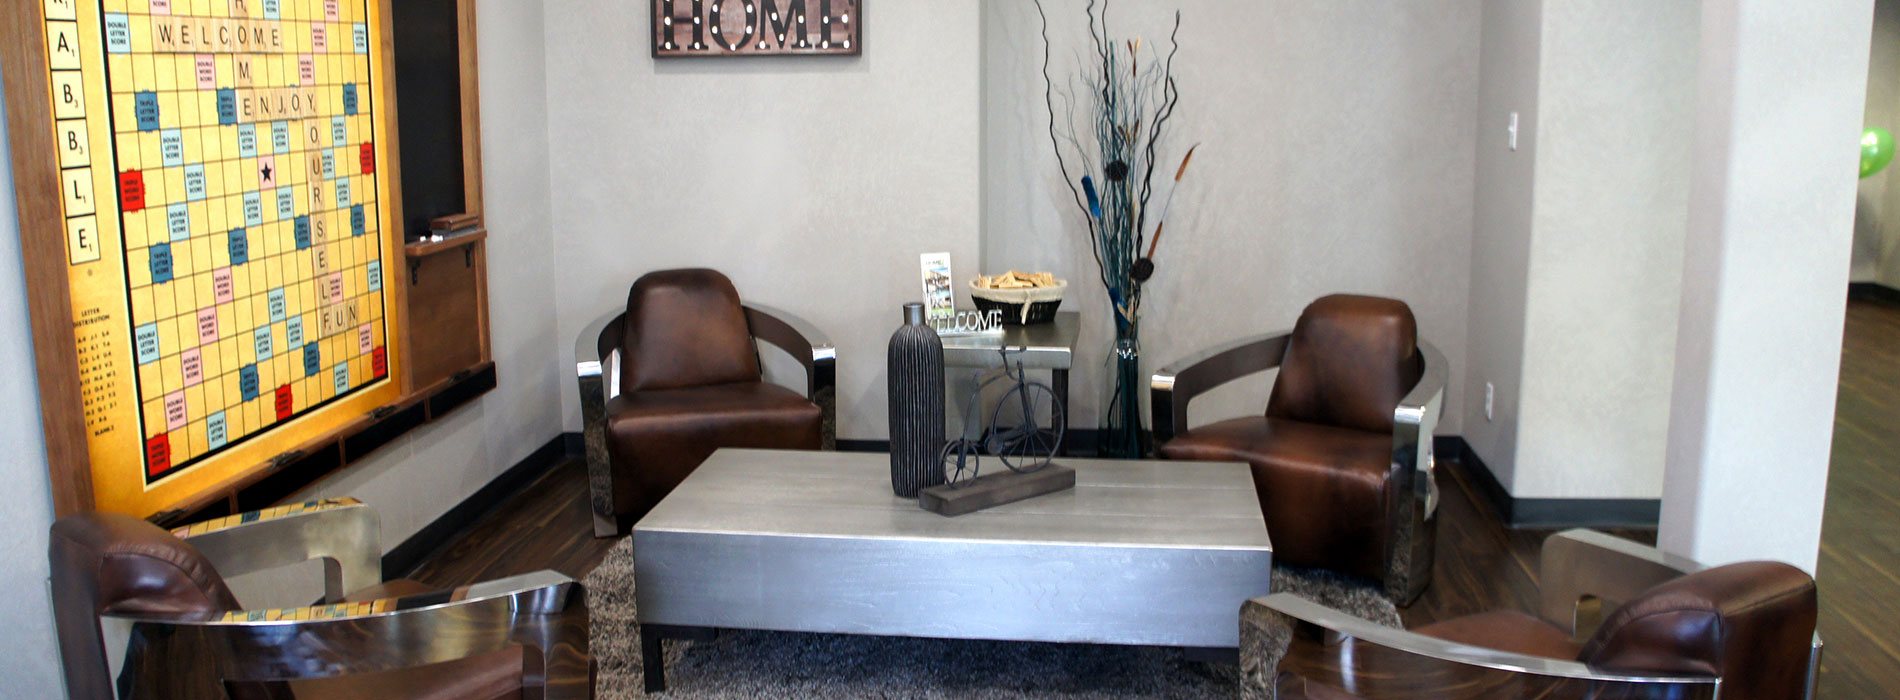 Four leather club chairs with thick metallic arms are matched with a solid metal top coffee table and side end table in the lounge and recreation space of d3h Home Inn Express in Medicine Hat, Alberta.  A large Scrabble board game is mounted against light gray walls with an attached blackboard for score keeping.